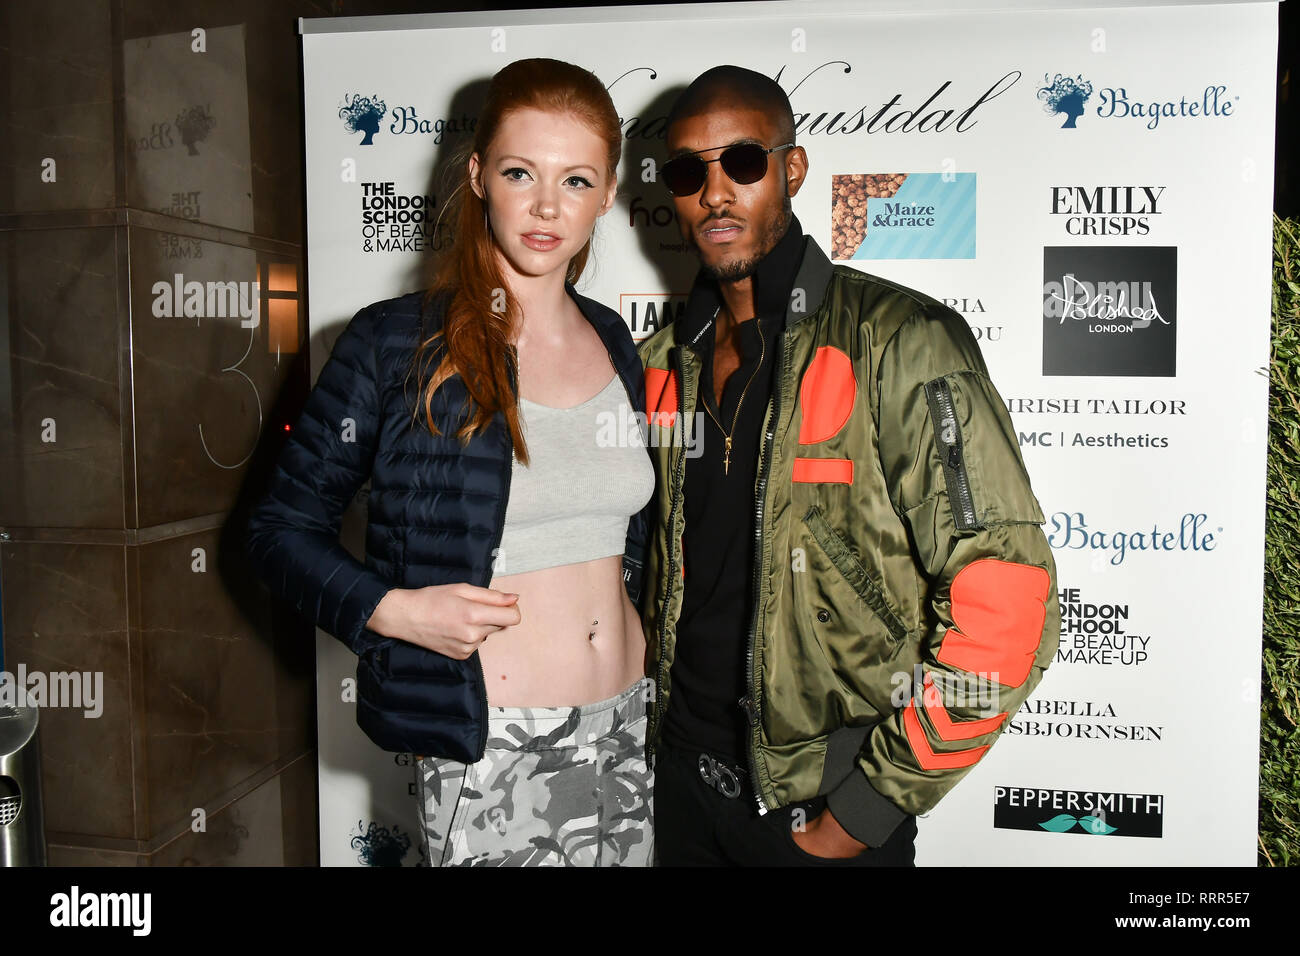 London, UK. 26th Feb 2019. Stefan-Pierre Tomlin (R) Arrivers at Nina Naustdal catwalk show SS19/20 collection by The London School of Beauty & Make-up at Bagatelle on 26 Feb 2019, London, UK. Credit: Picture Capital/Alamy Live News Stock Photo